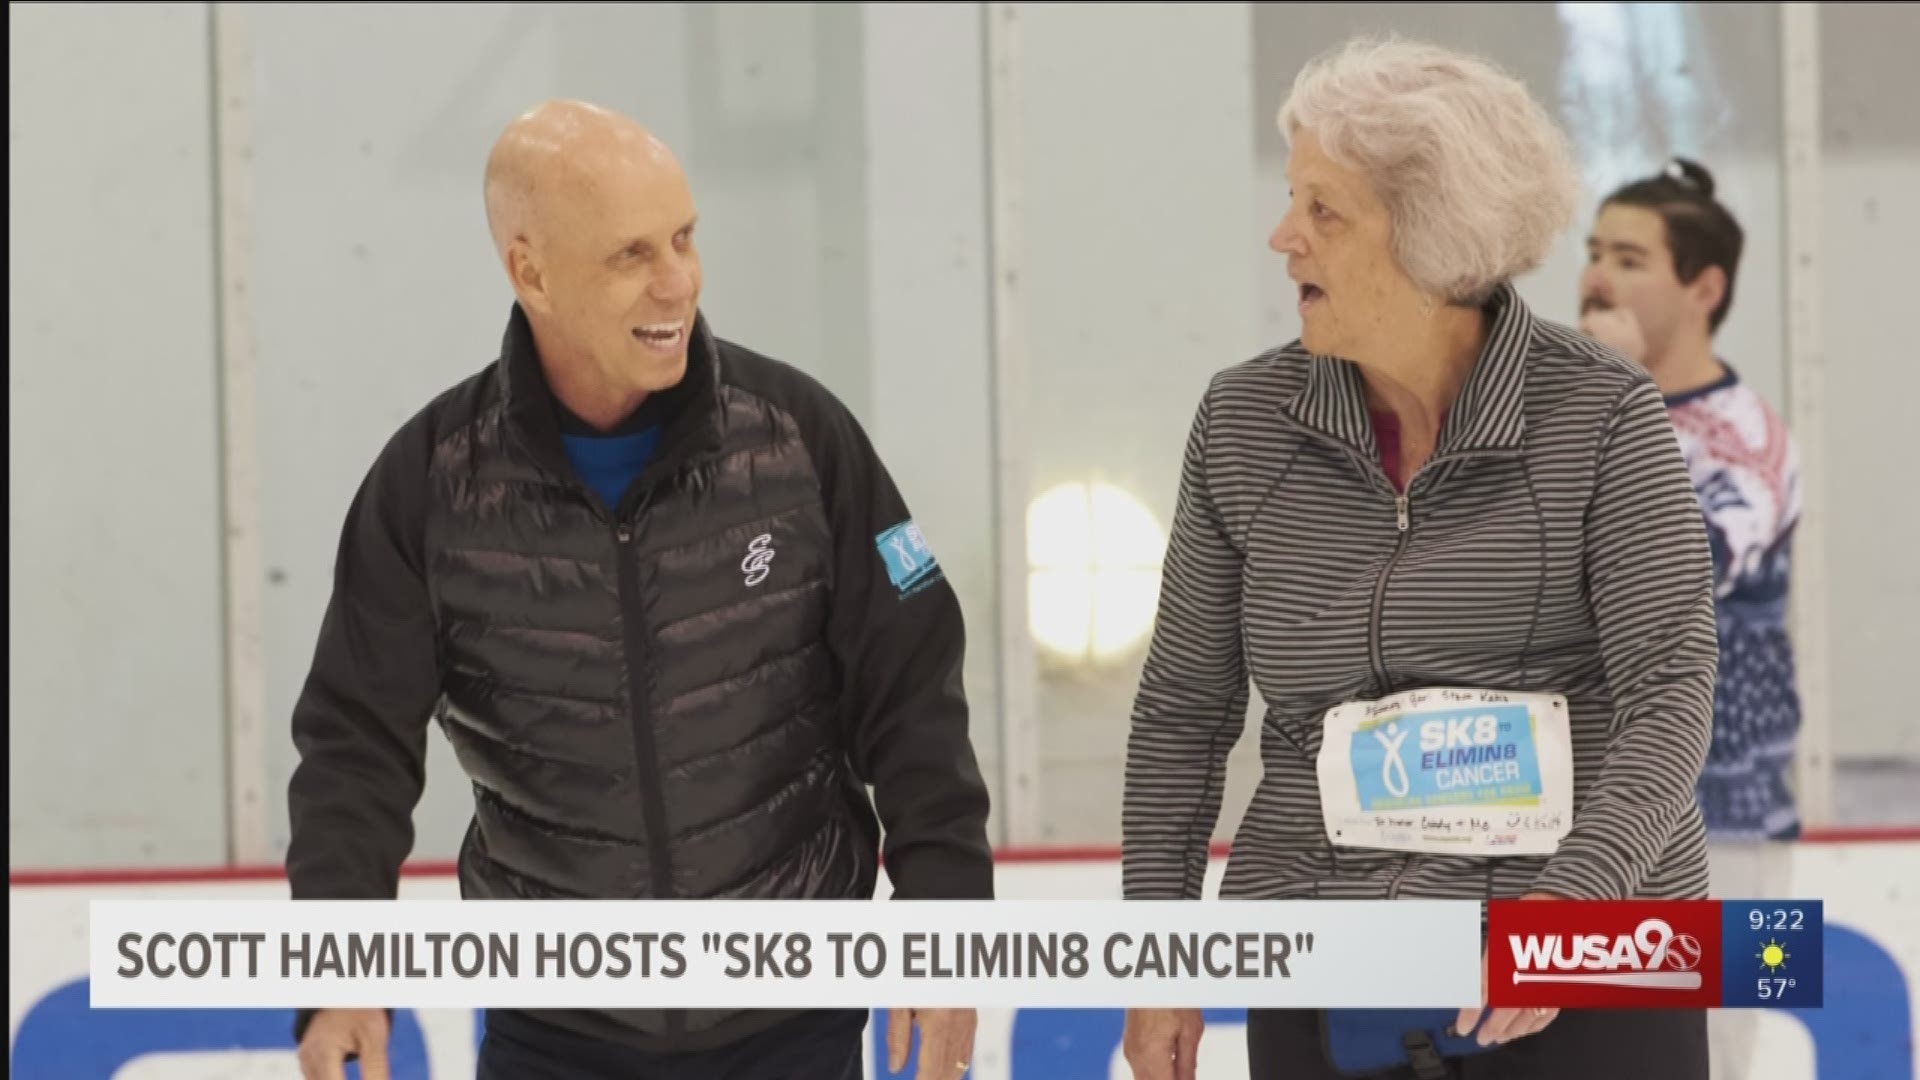 Scott Hamilton, Olympic gold medalist figure skater talks about his CARES Foundation that helps the fight against cancer. For more details, visit mysk8.org.